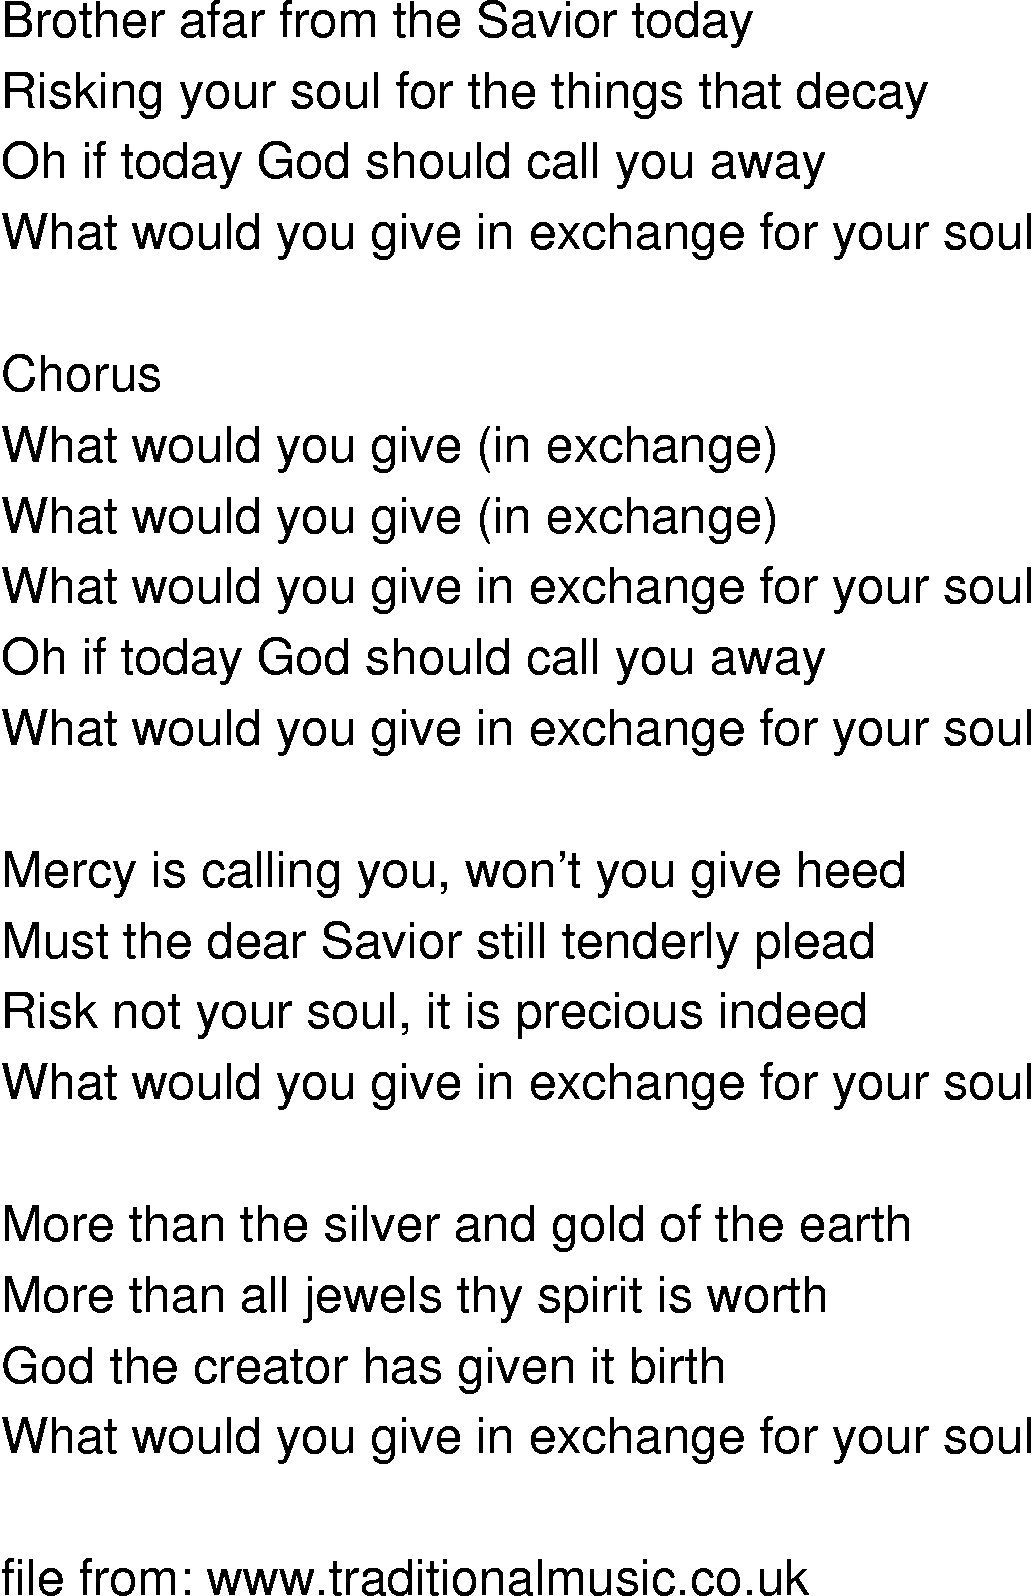 Old-Time (oldtimey) Song Lyrics - what would you give in exchange for your soul